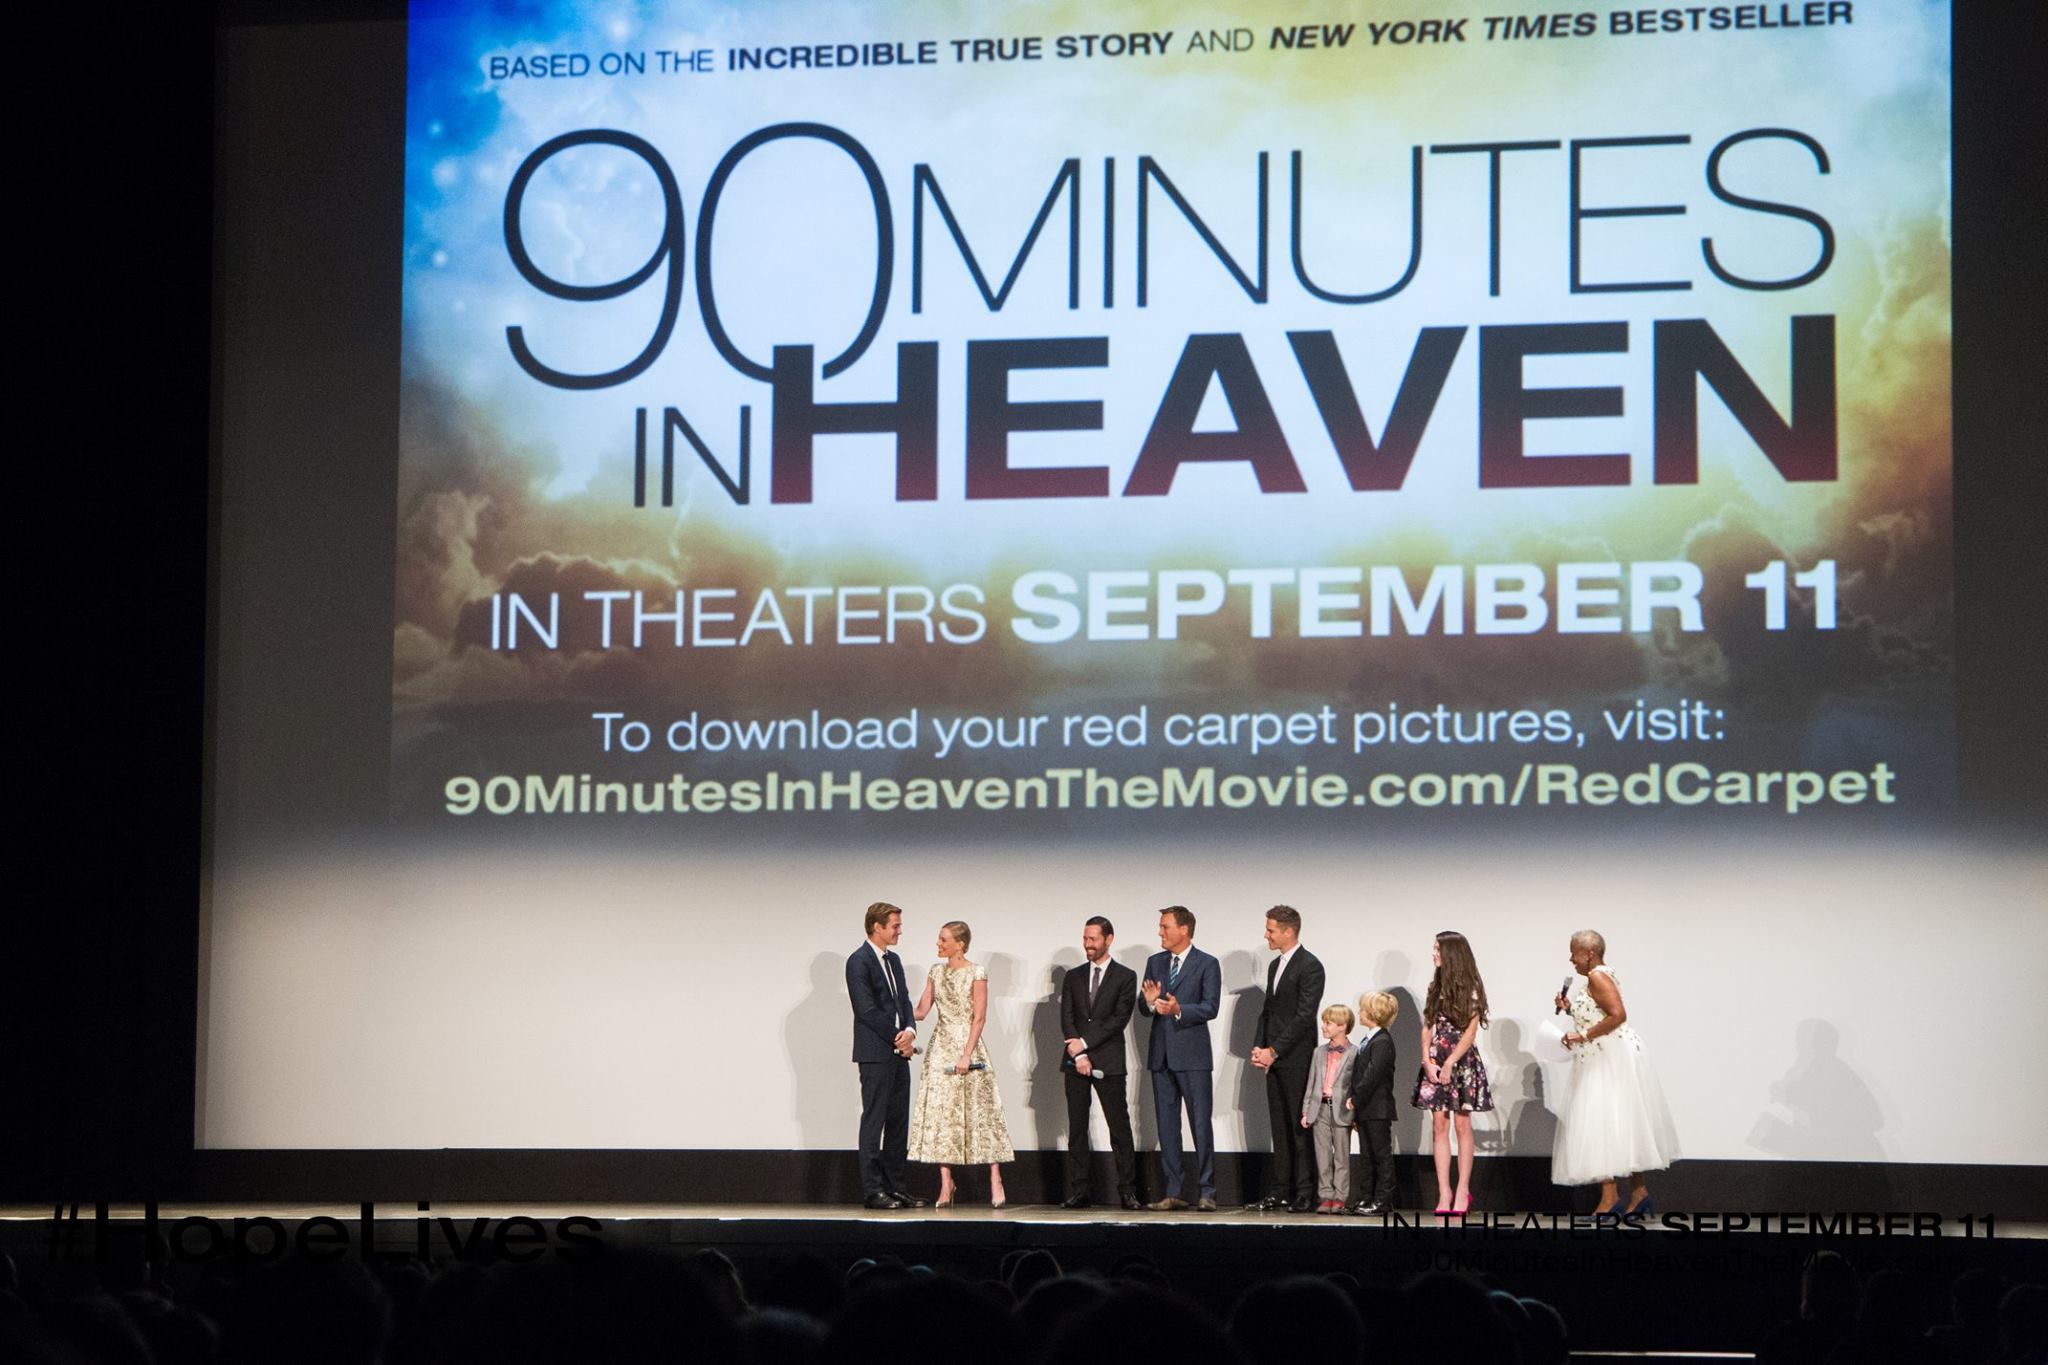 Bobby Batson on stage with Hayden Christensen, Michael W. Smith, Kate Bosworth, Jason Kennedy & others at the 90 Minutes In Heaven premiere